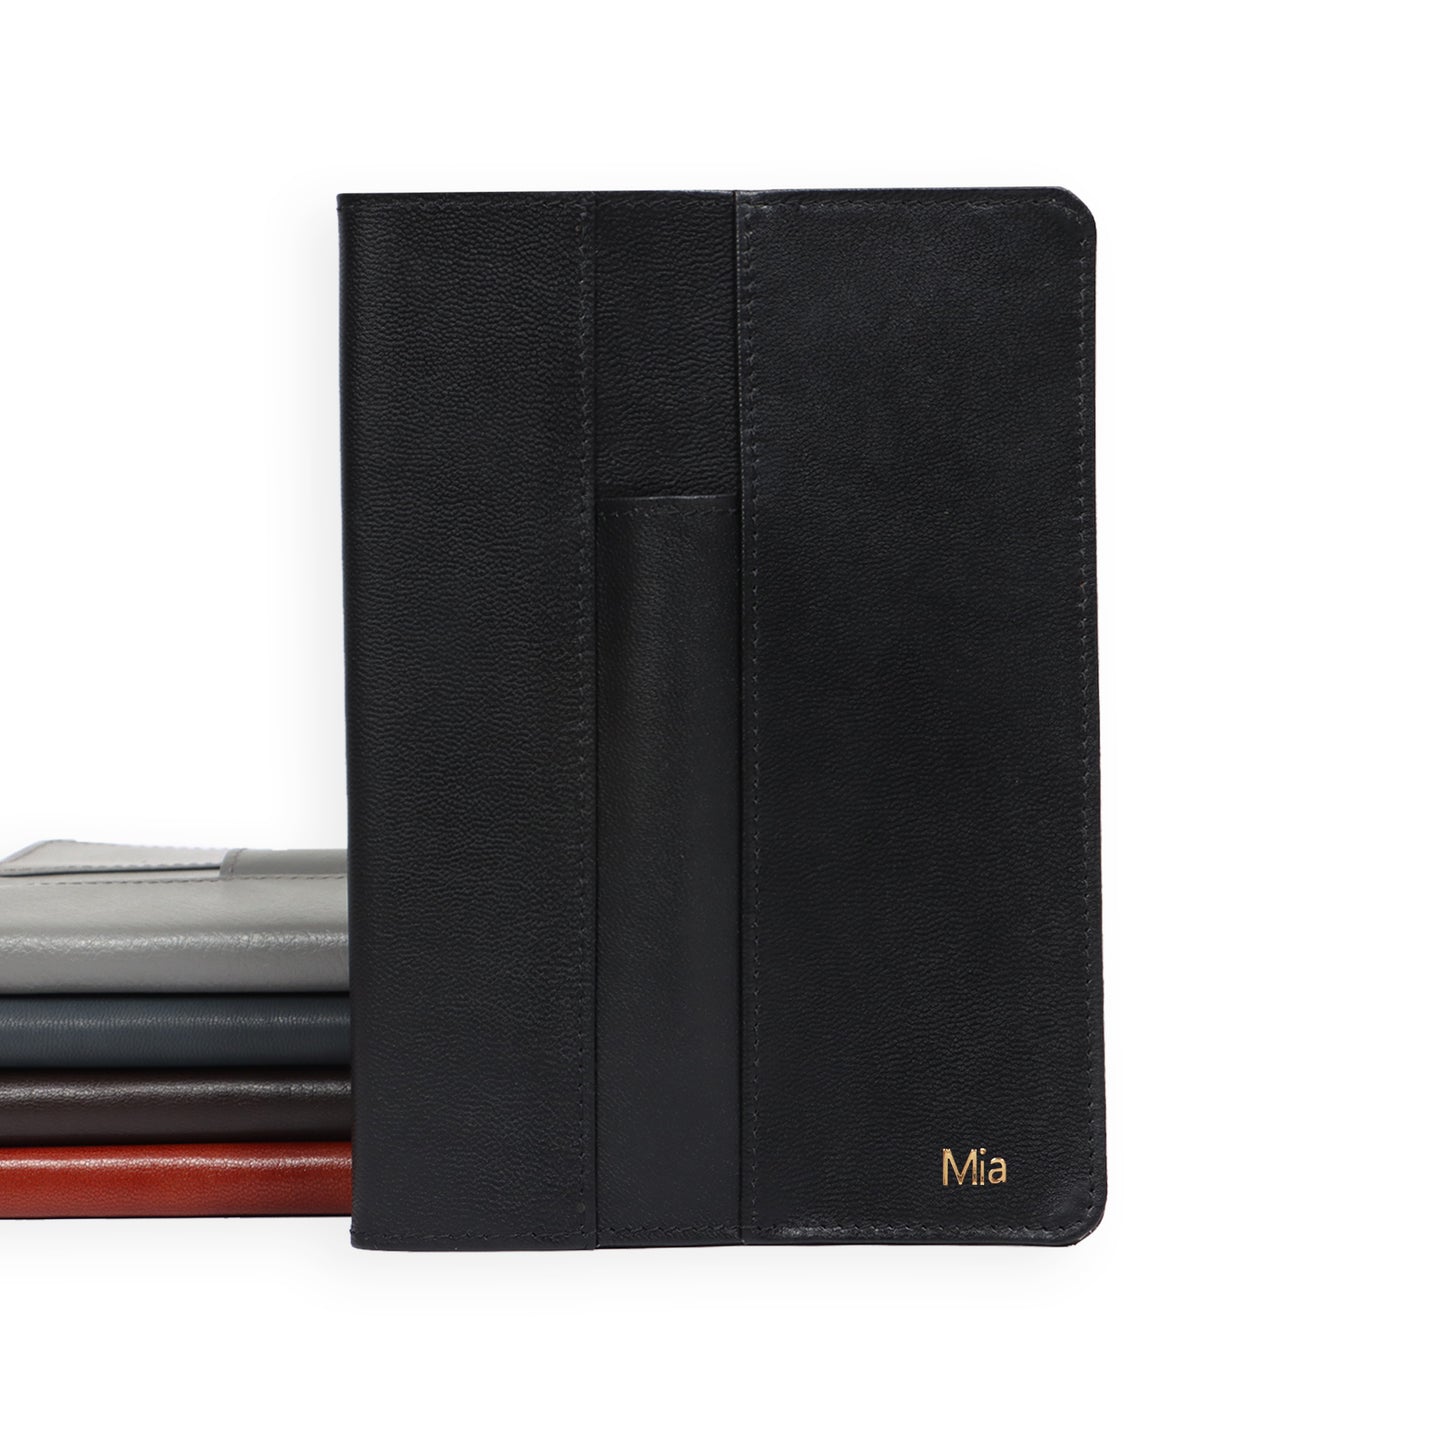 Soft Leather Refilalble Journal with Frontal Pen Pocket